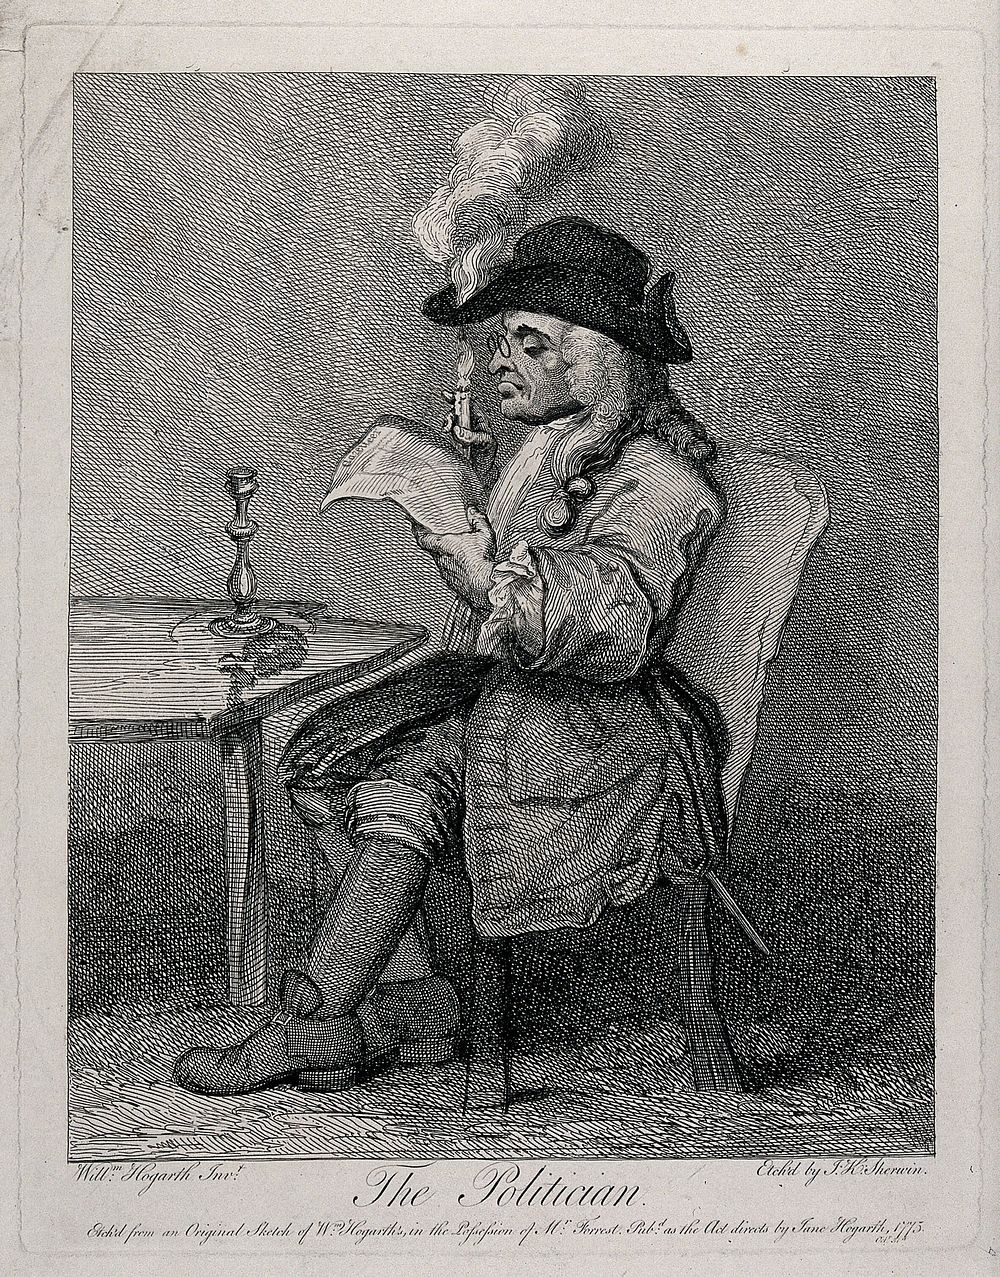 A politician engrossed in reading the "Gazetteer" and burning the brim of his hat with a candle while he does so. Etching by…